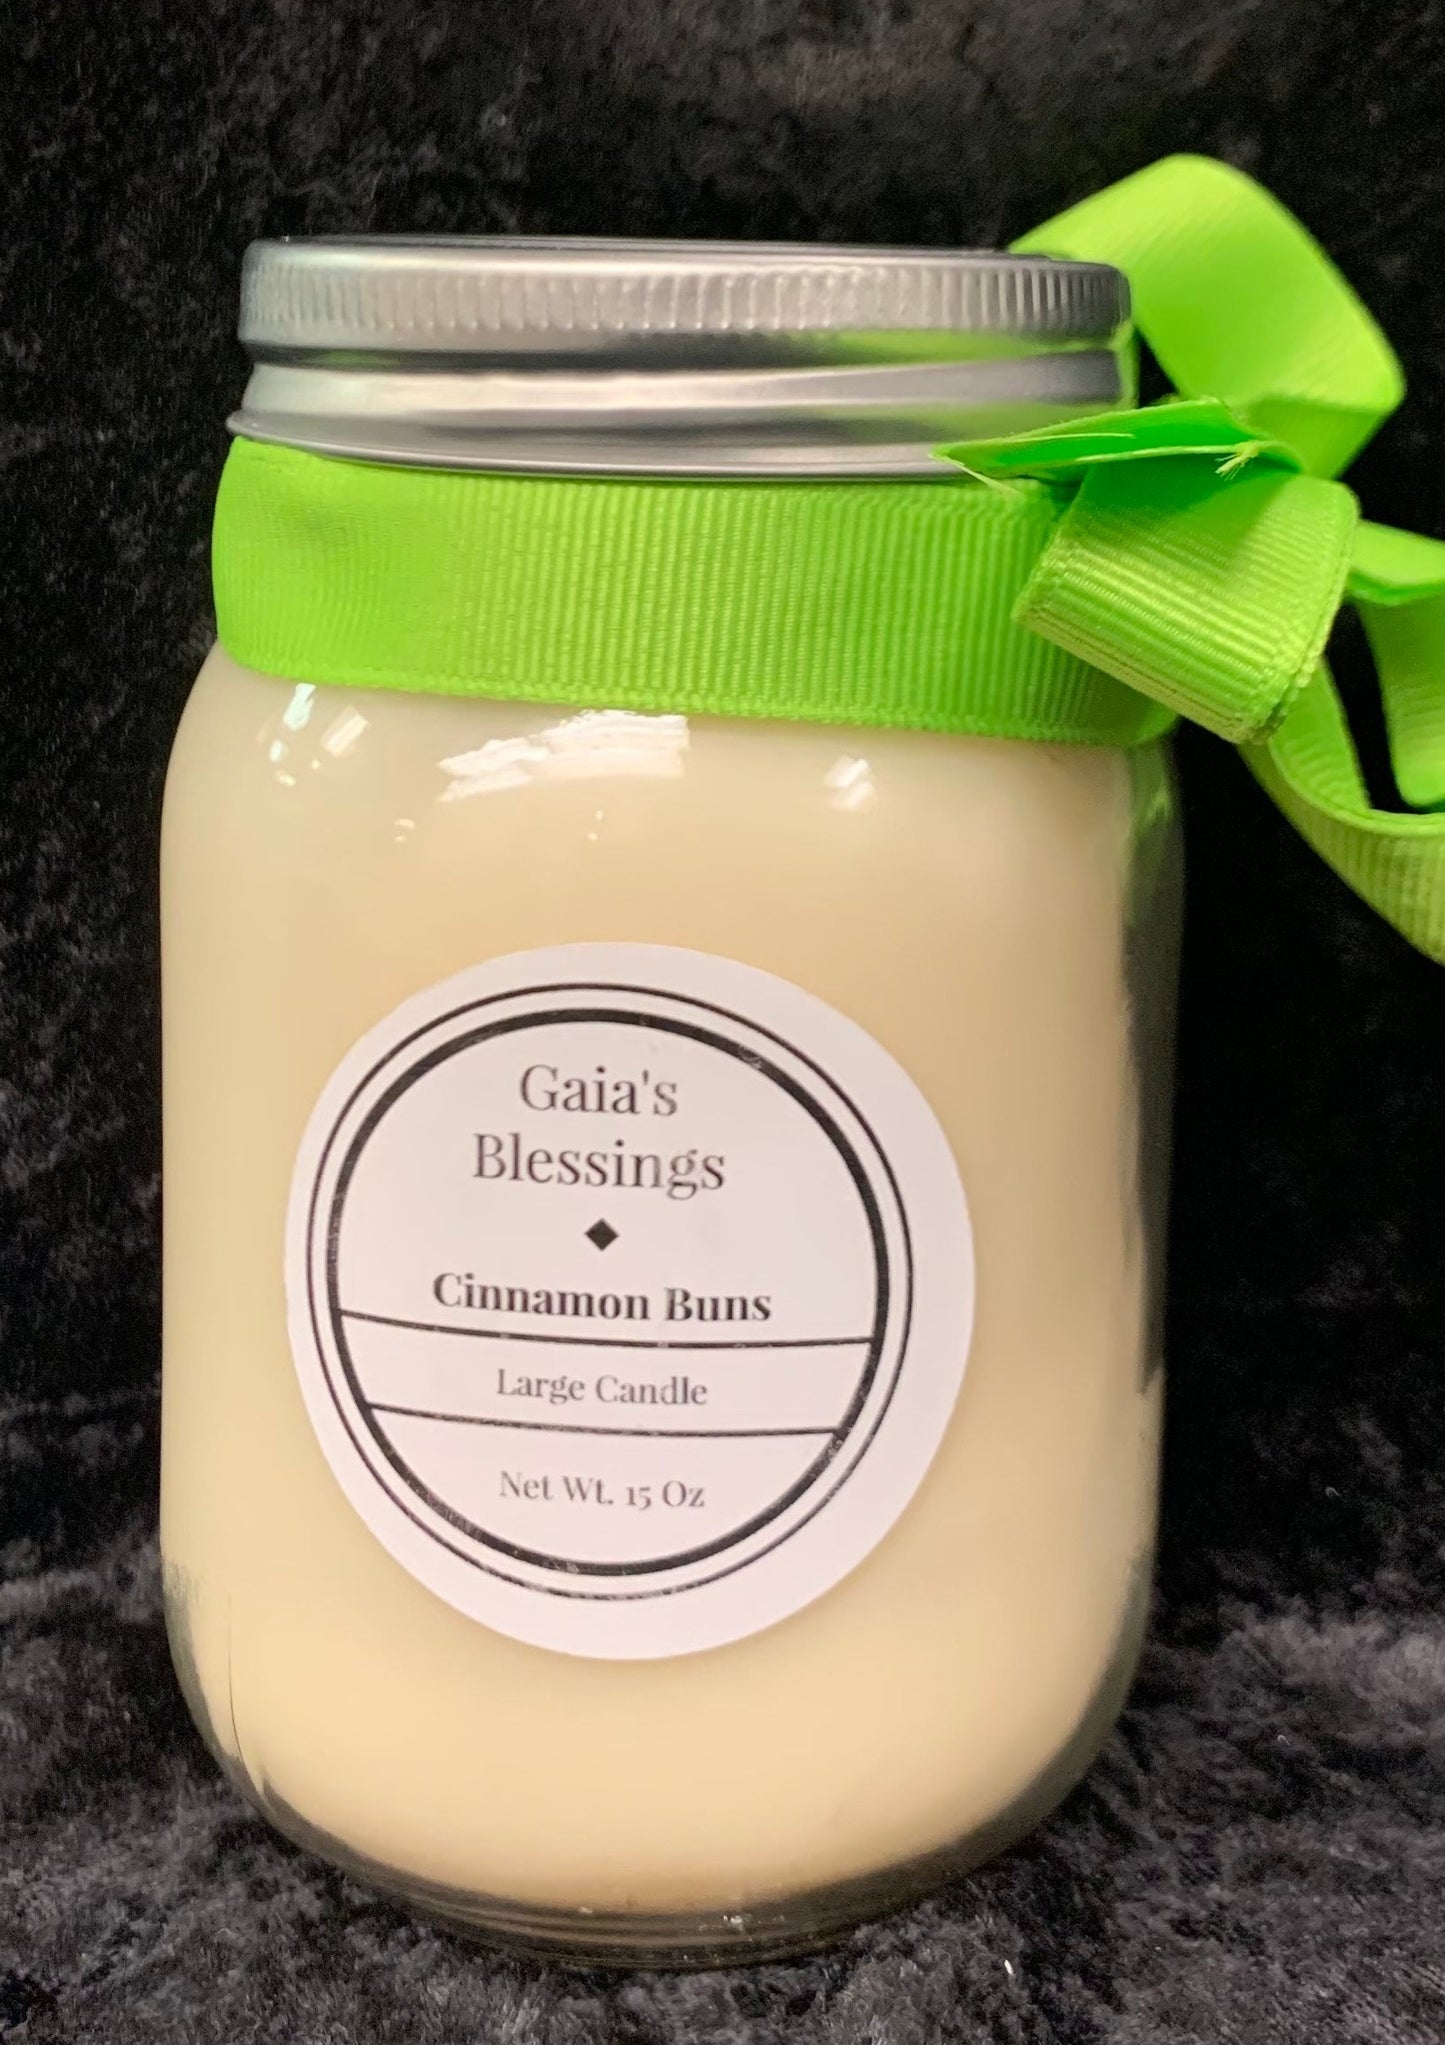 Cinnamon Buns fragrance eco-friendly blended wax candle